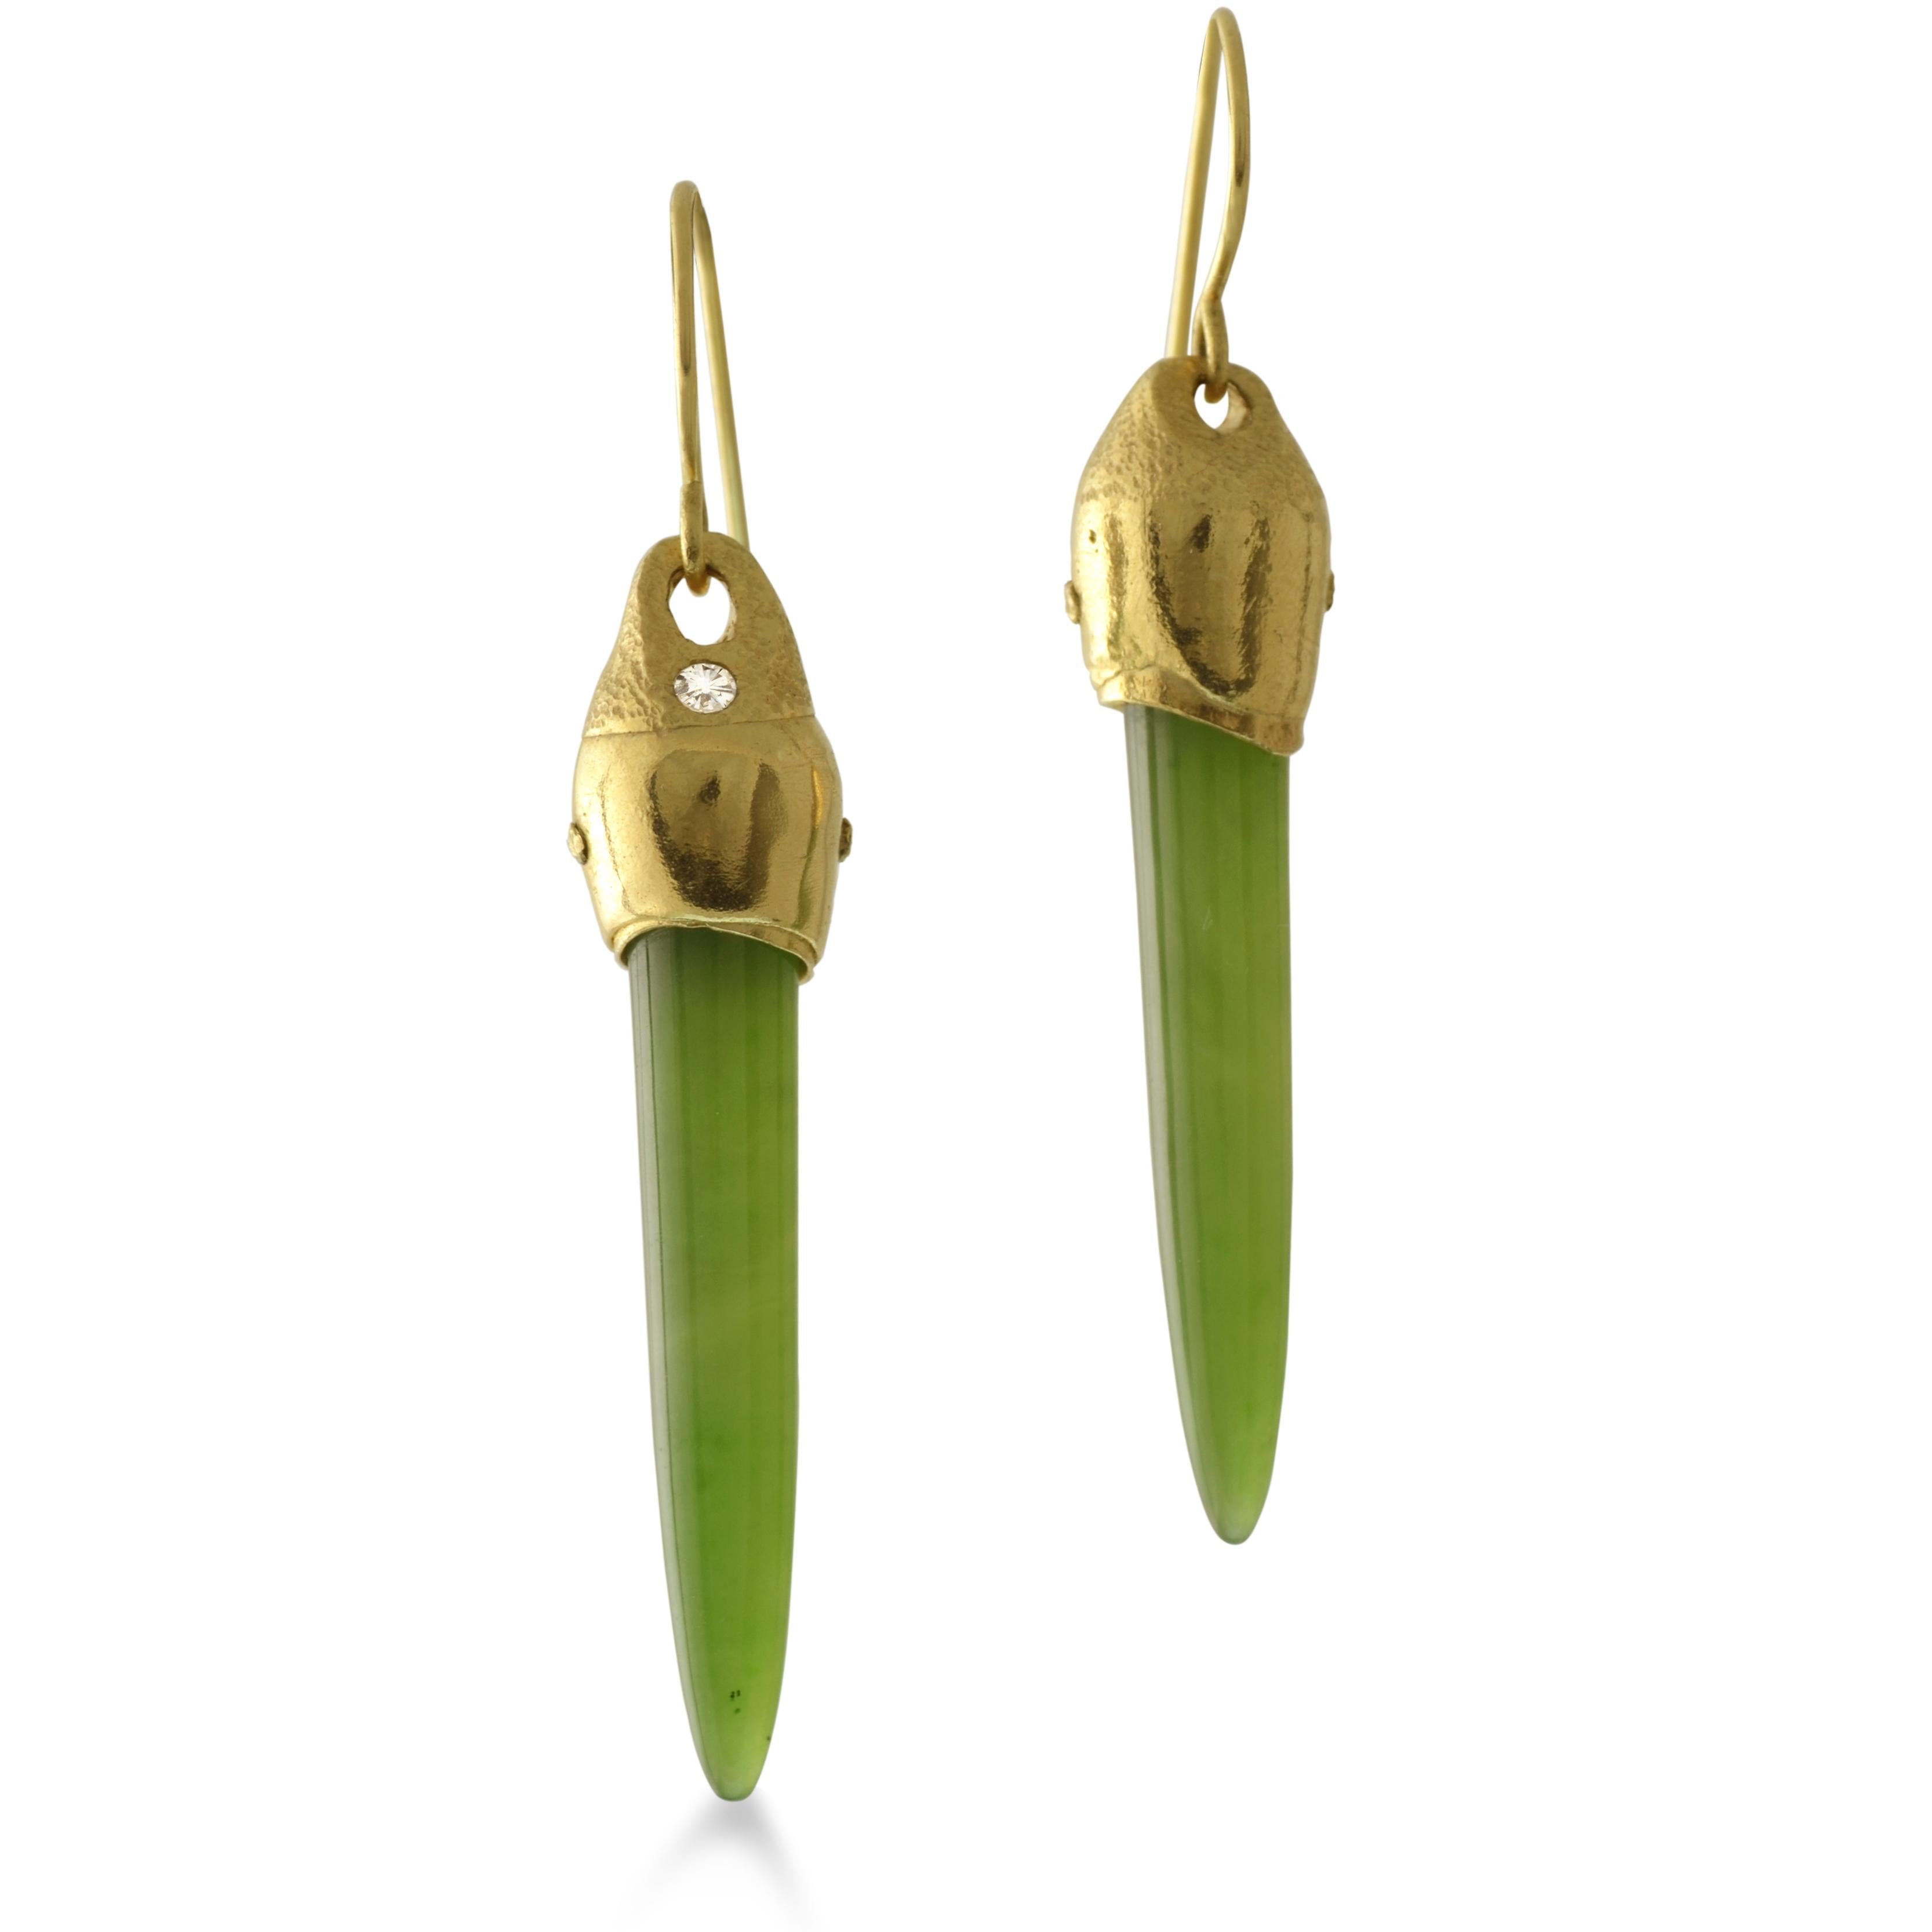 Being the same as someone else isn't as interesting as being your own self. We've created these Nephrite Jade earrings to let you wear what you feel and to look fabulous in your ears. These elongated bullet-shaped Arizona (totally gemmy) green